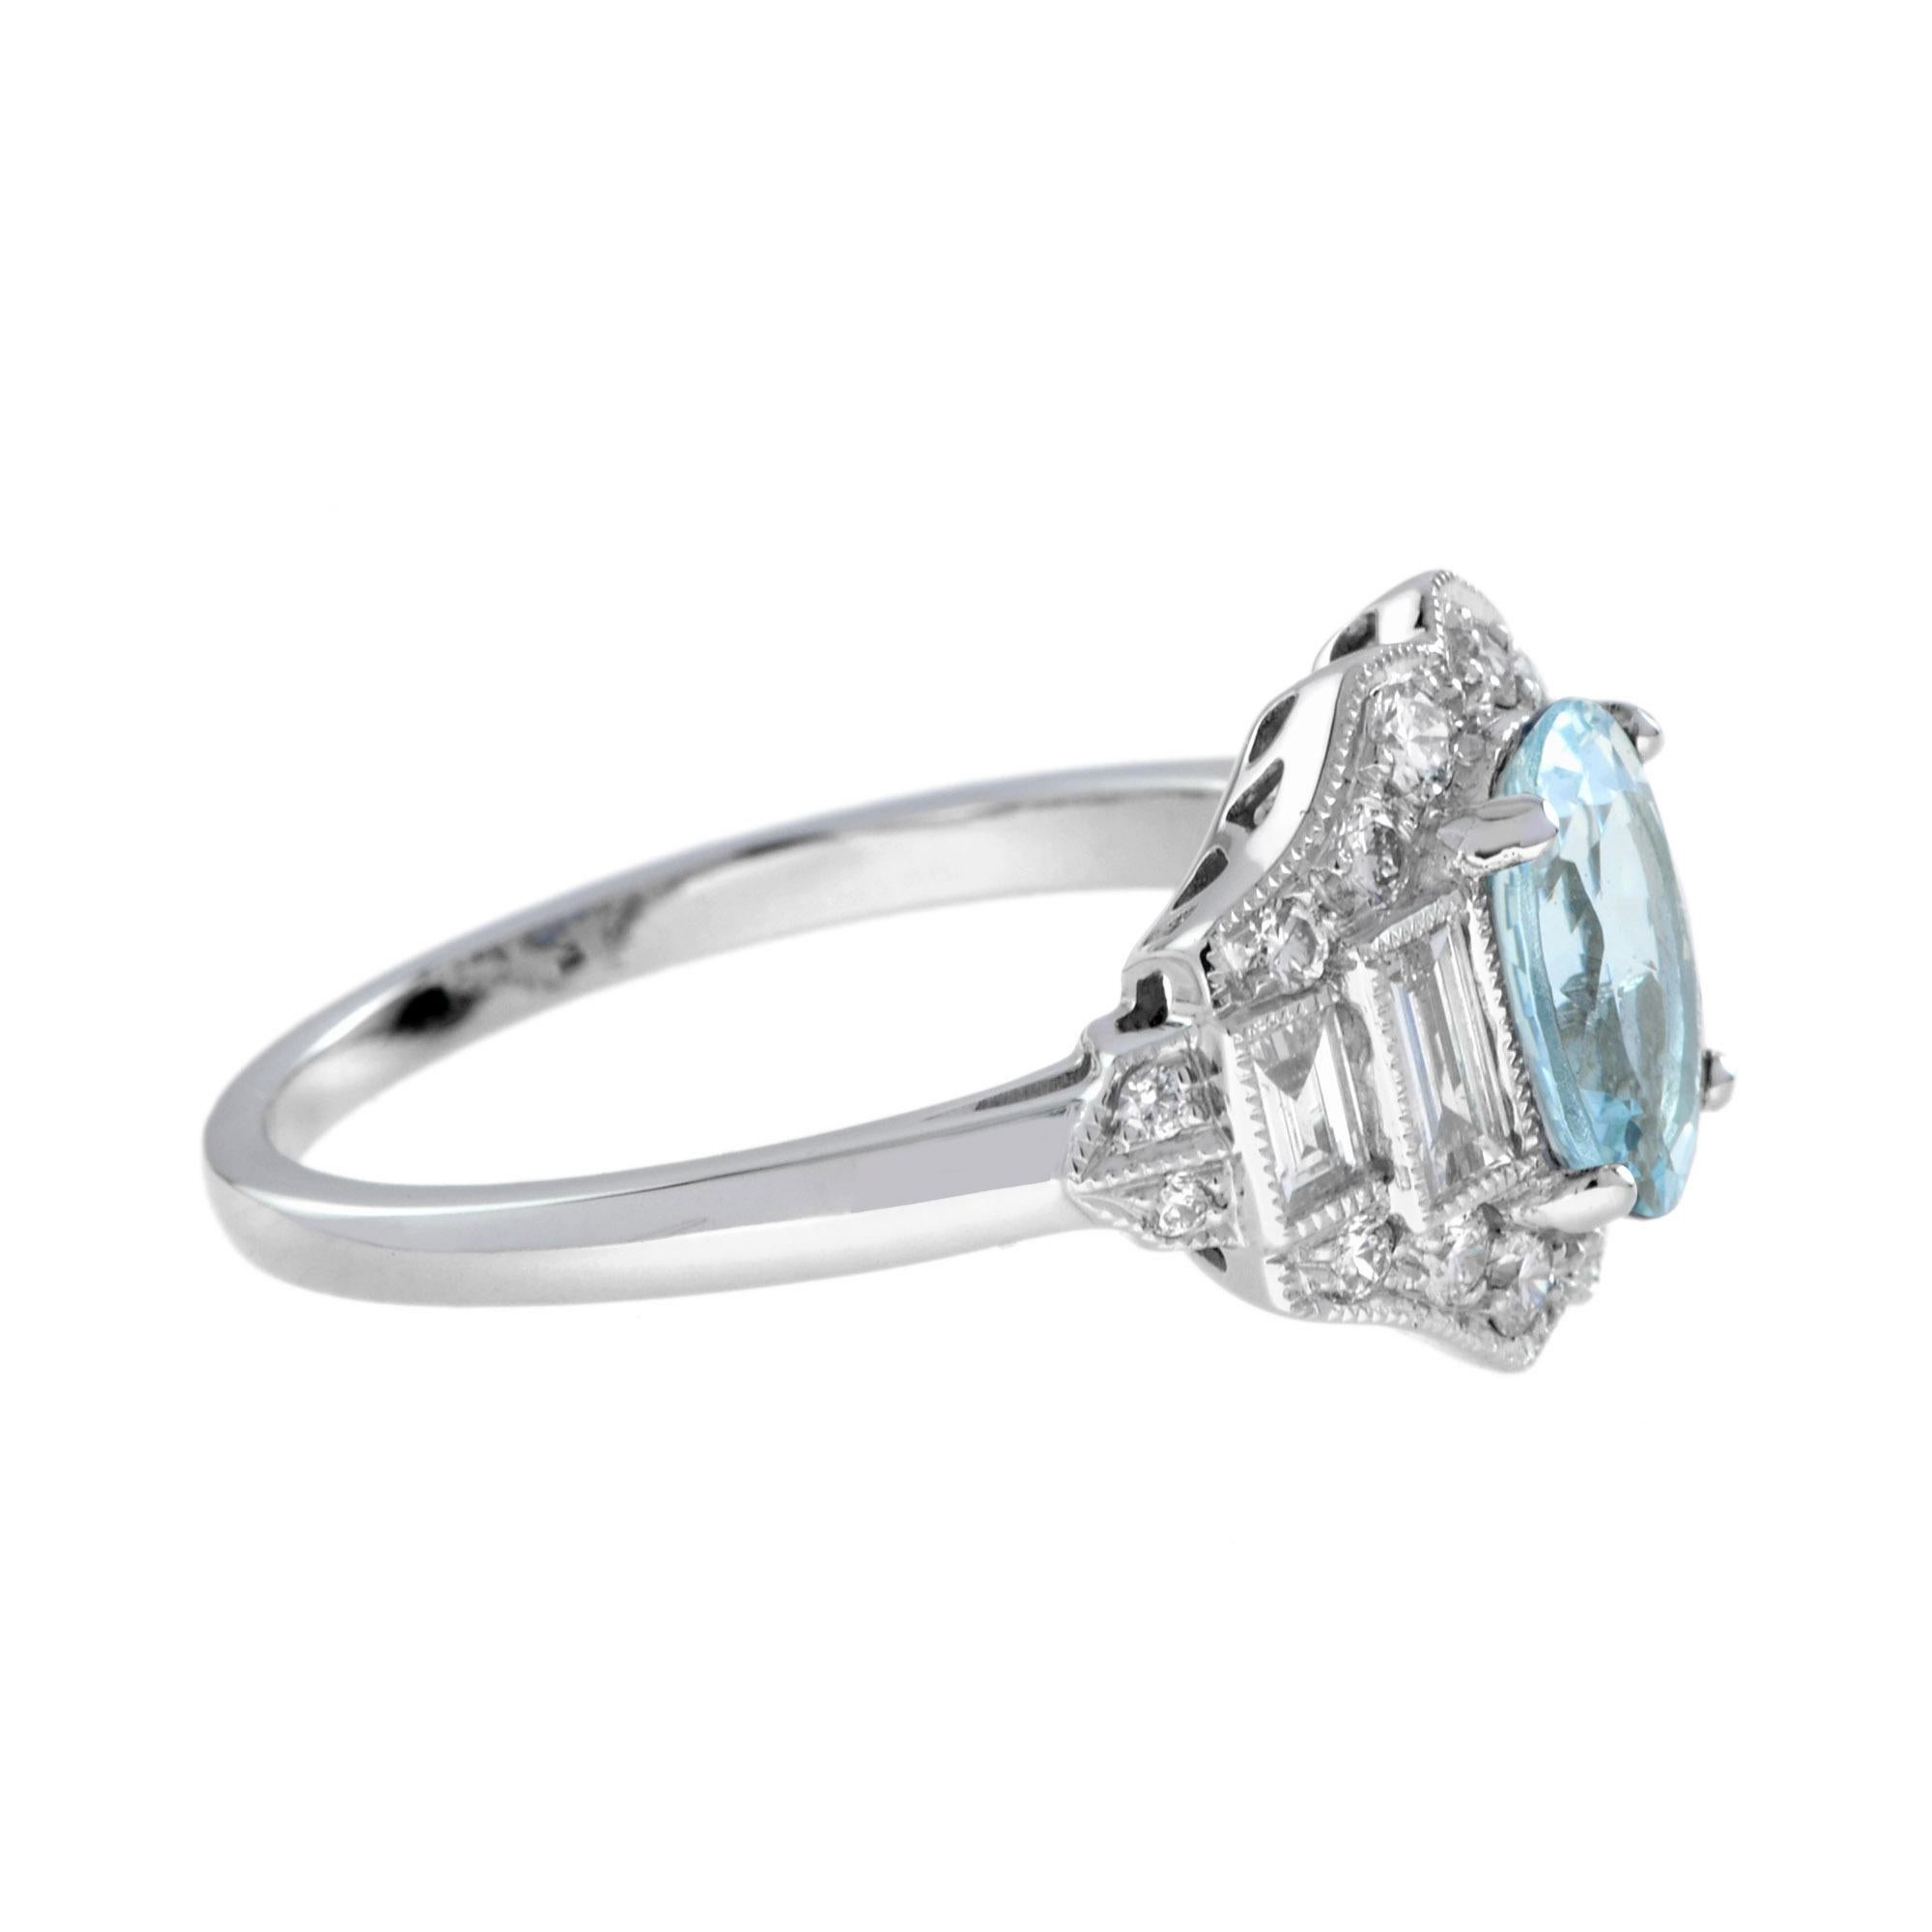 For Sale:  1.50 Ct. Aquamarine and Diamond Art Deco Style Engagement Ring in 18K Gold 4